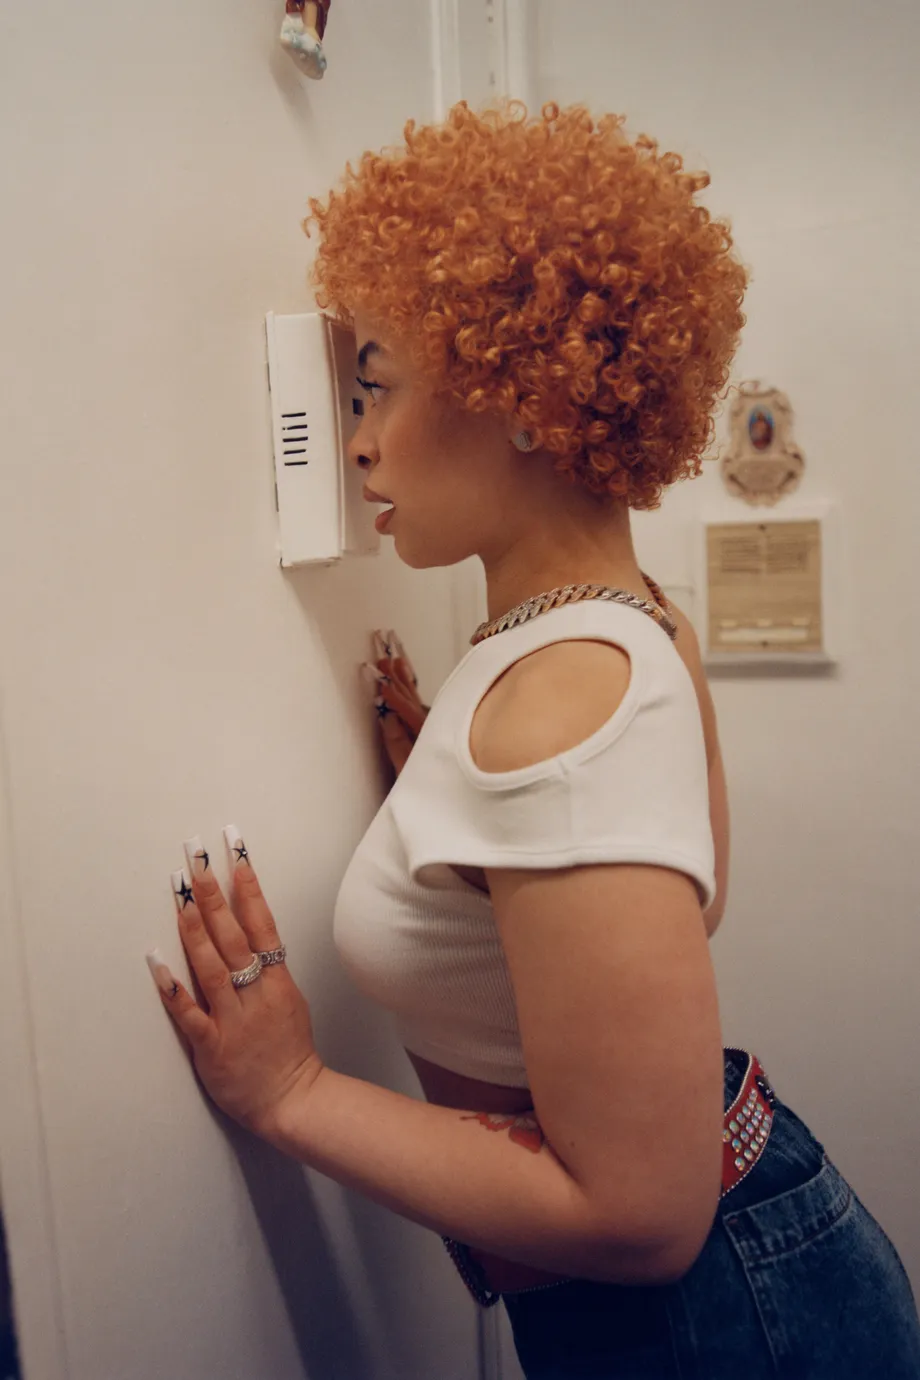 A woman with orange hair is looking through a peephole. - Ice Spice